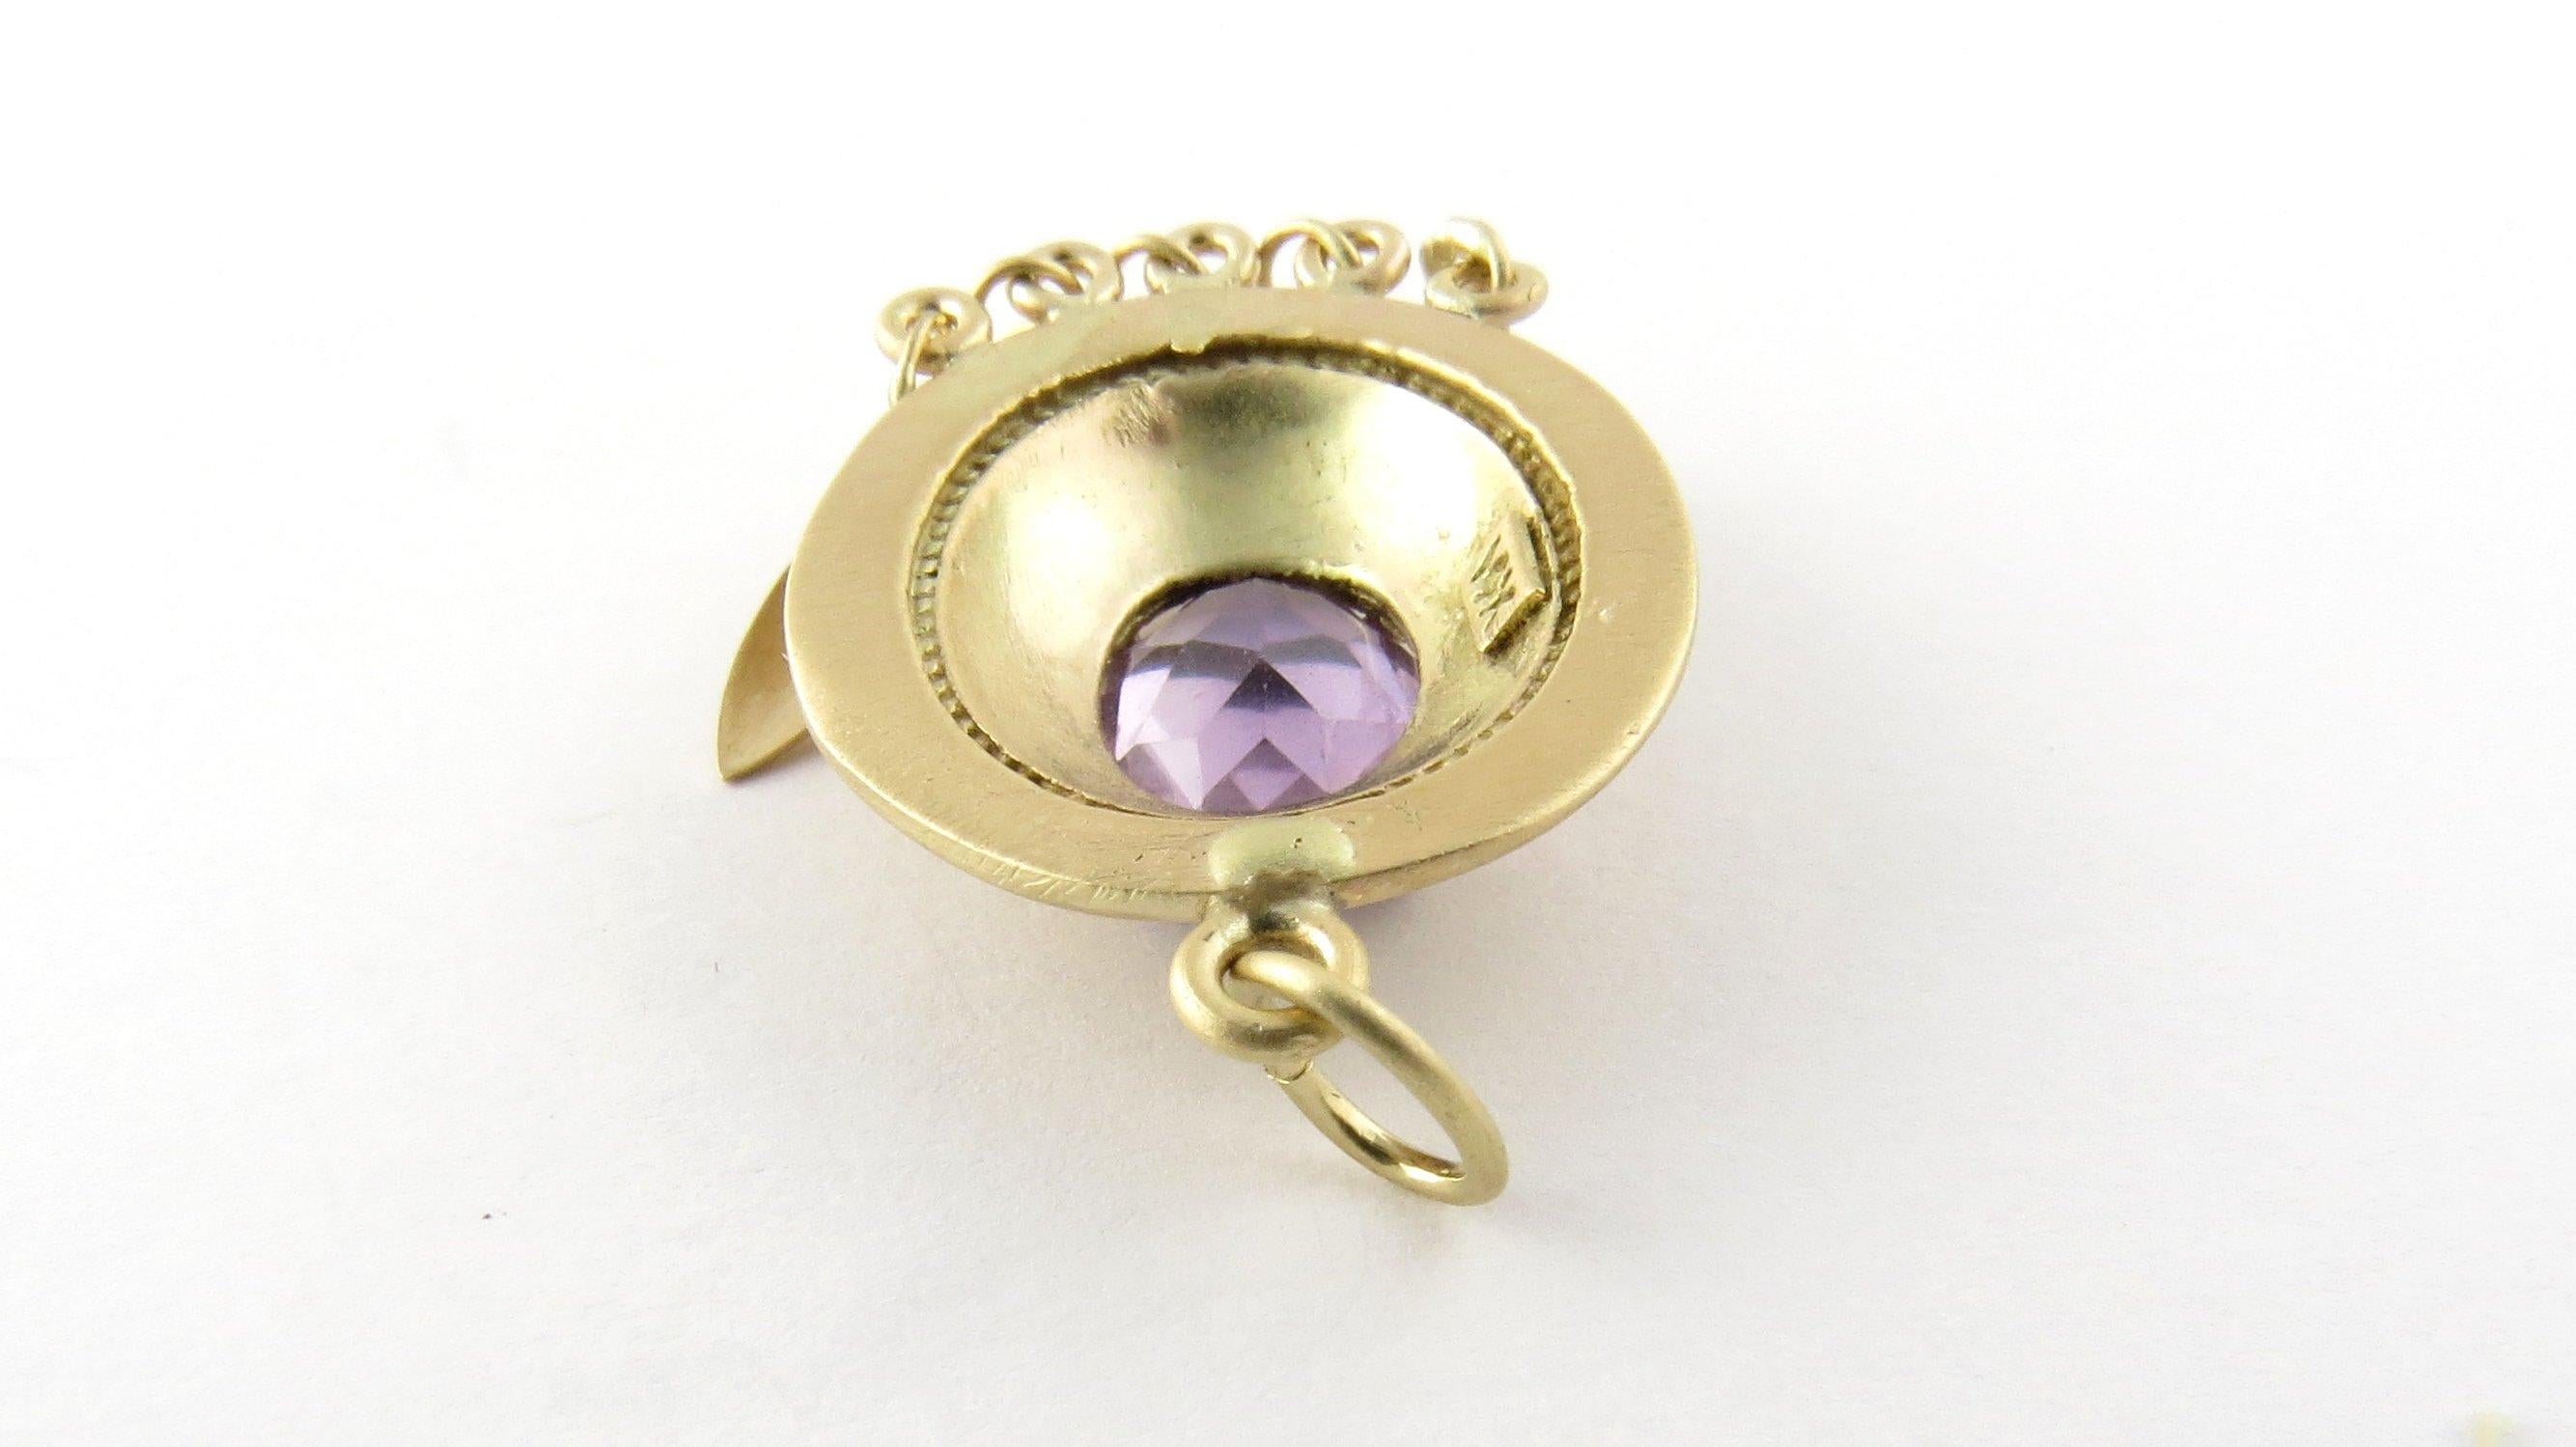 Vintage 14 Karat Yellow Gold Amethyst Pendant. This lovely pendant features one genuine oval amethyst gemstone (12 mm x 9 mm) set in exquisitely detailed 14K yellow gold.
Size: 30 mm x 17 mm. Weight: 2.9 dwt. / 4.6 gr. Stamped: 14K
Very good